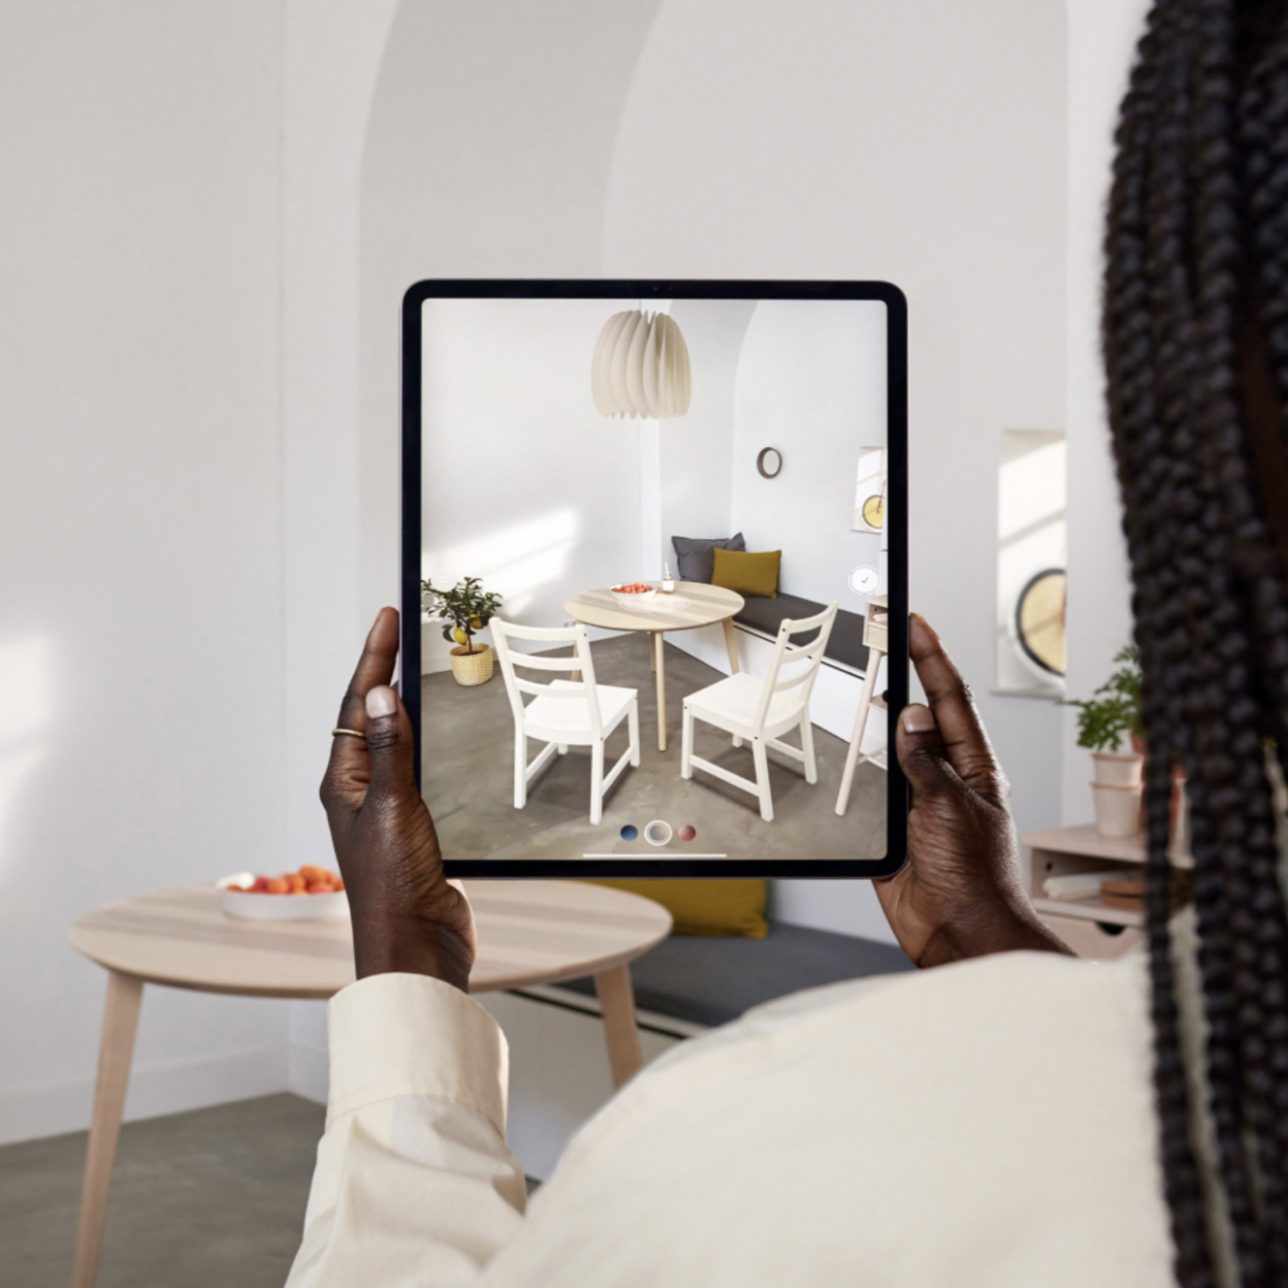 How AR opens opportunities for user generated content